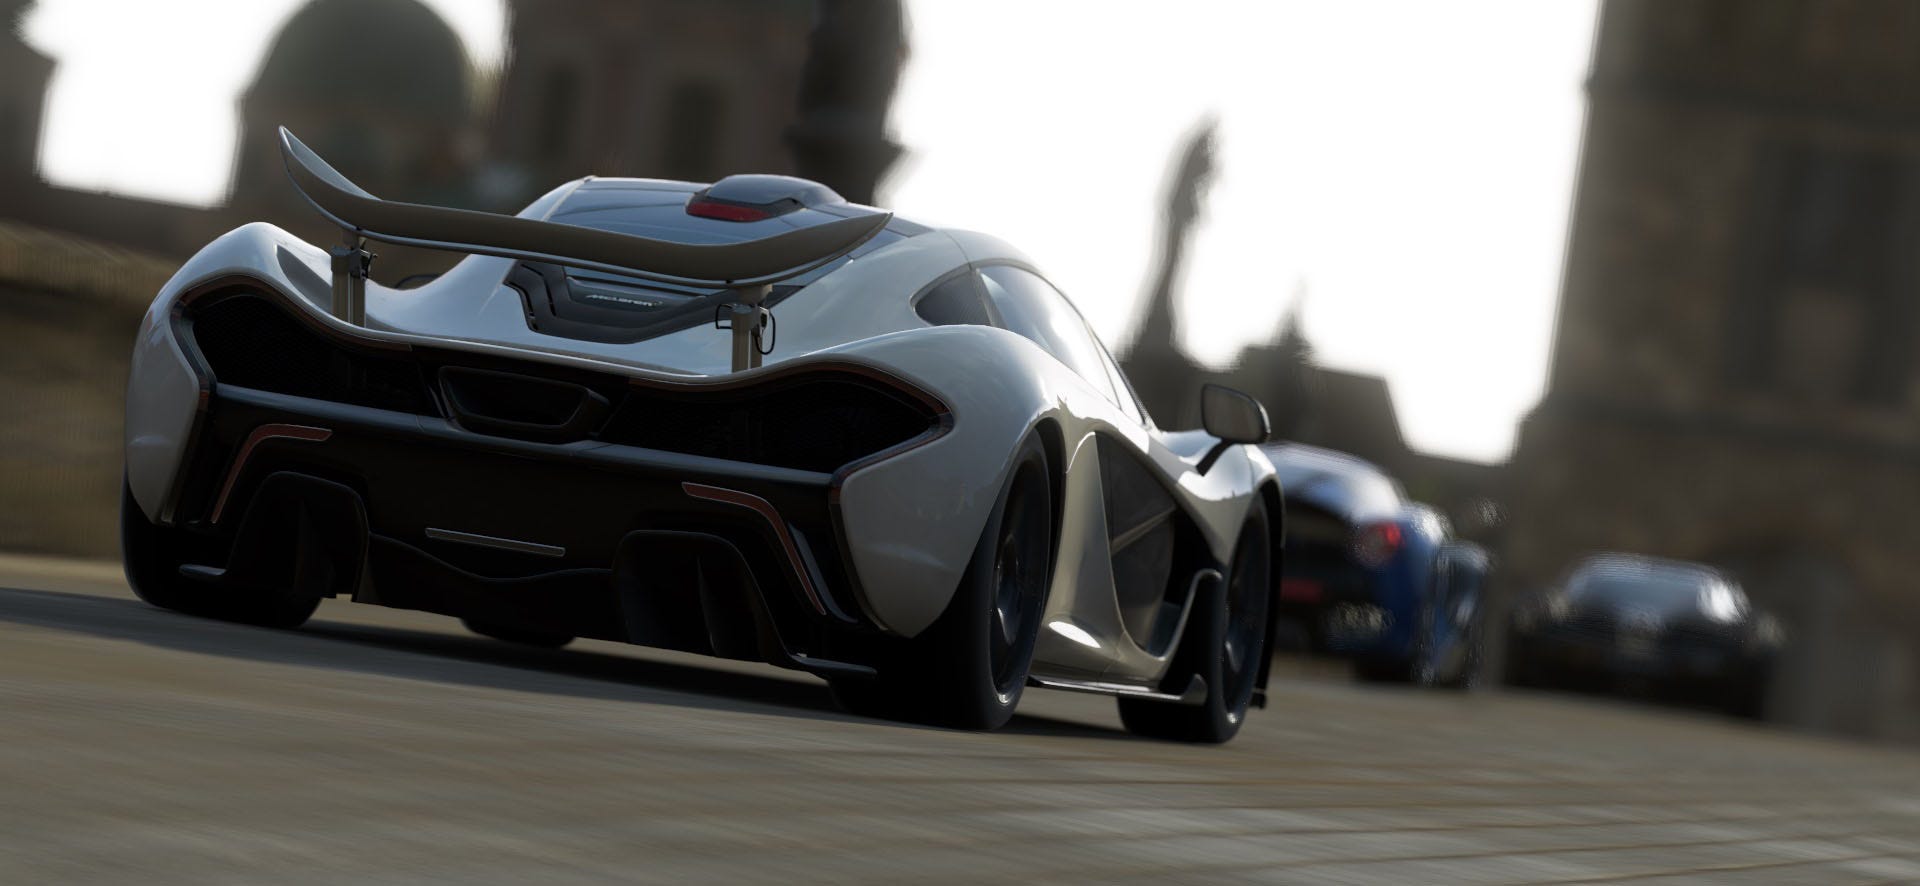 Gran Turismo 7 update should make the game a hell of a lot less grindy